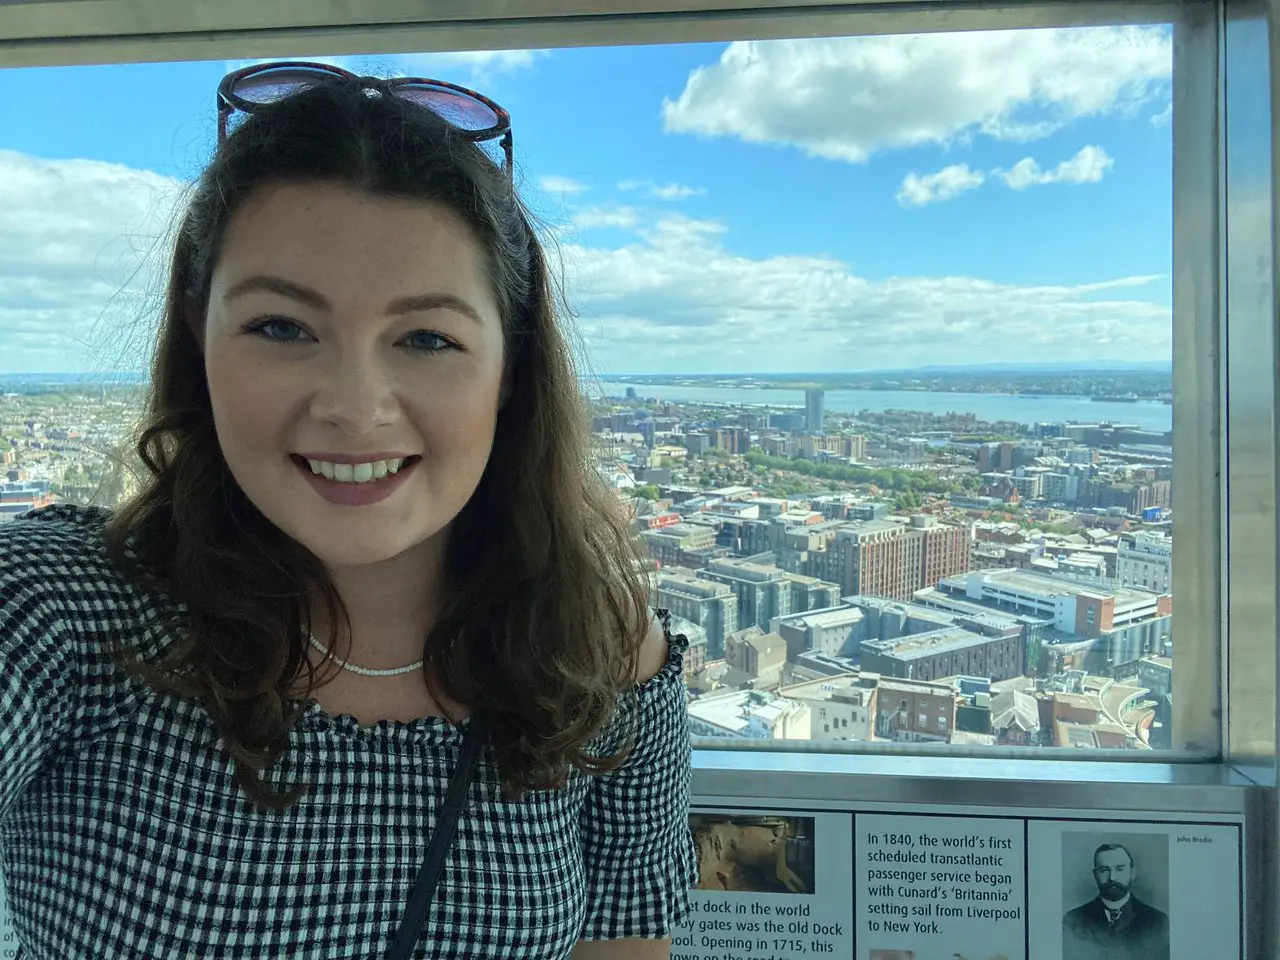 A selfie of Ella wearing a black and white gingham dress at the top of the St John's Beacon in Liverpool. The city skyline is in the background.